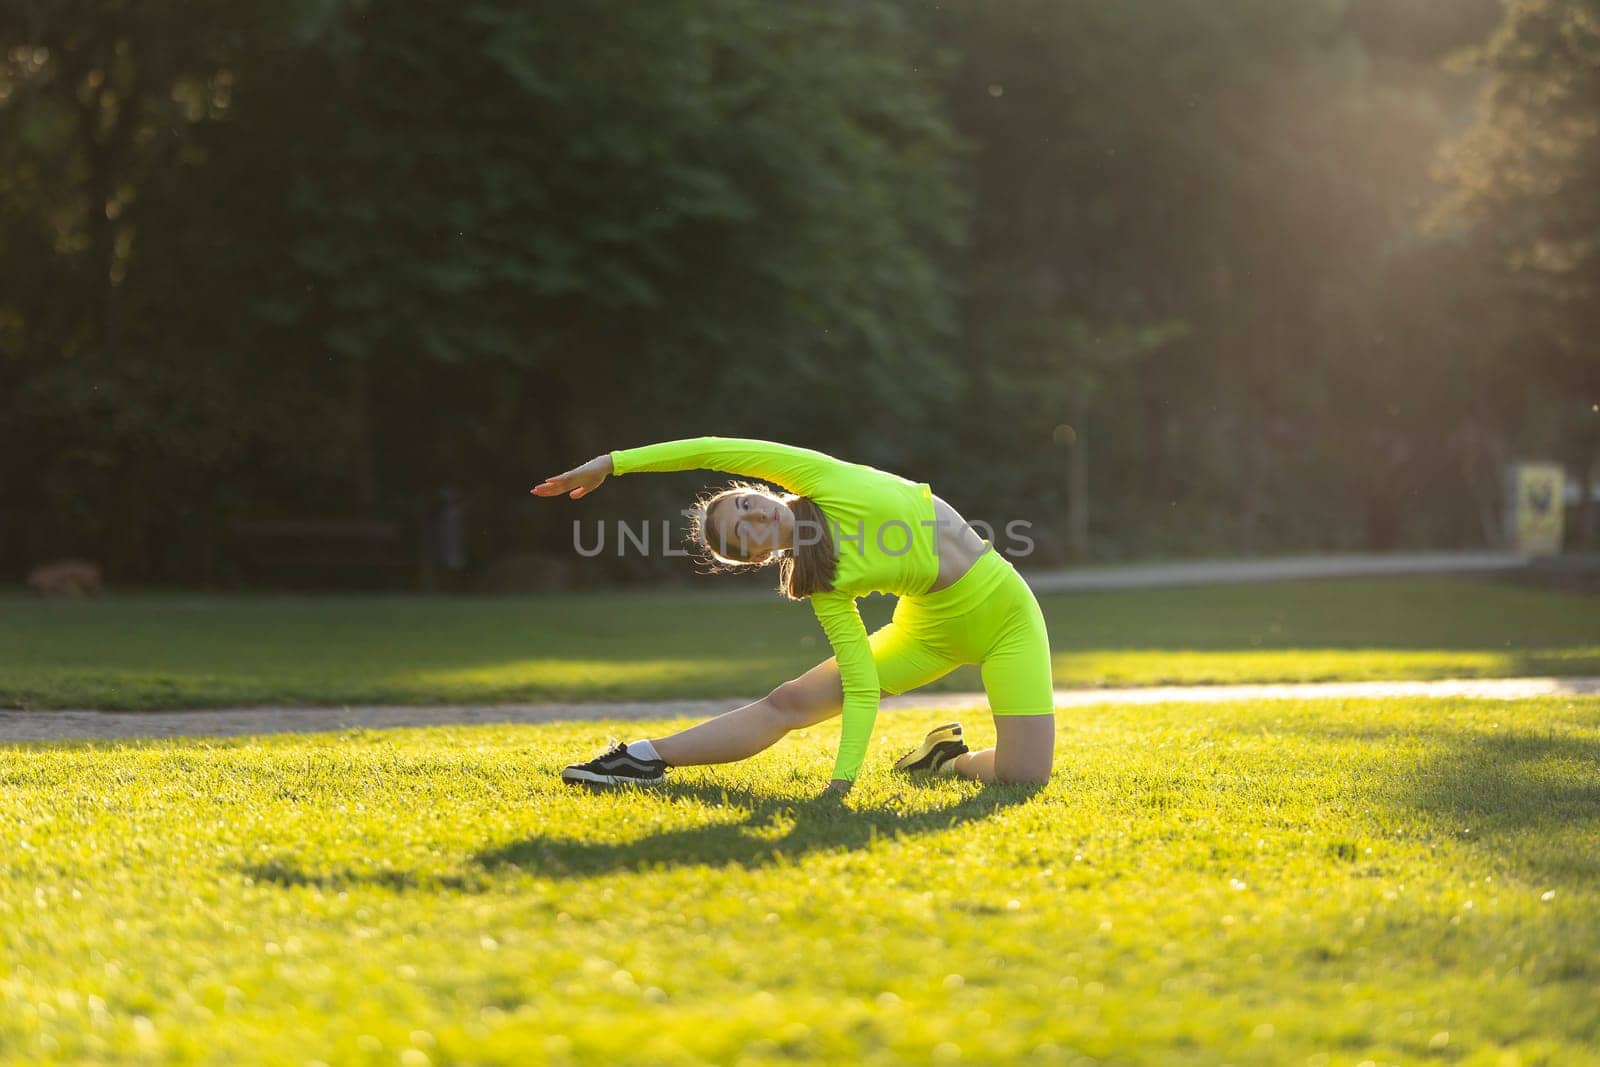 A woman in a neon green outfit is doing a yoga pose on a grassy field. The bright colors of her outfit and the surrounding green grass create a cheerful and energetic mood